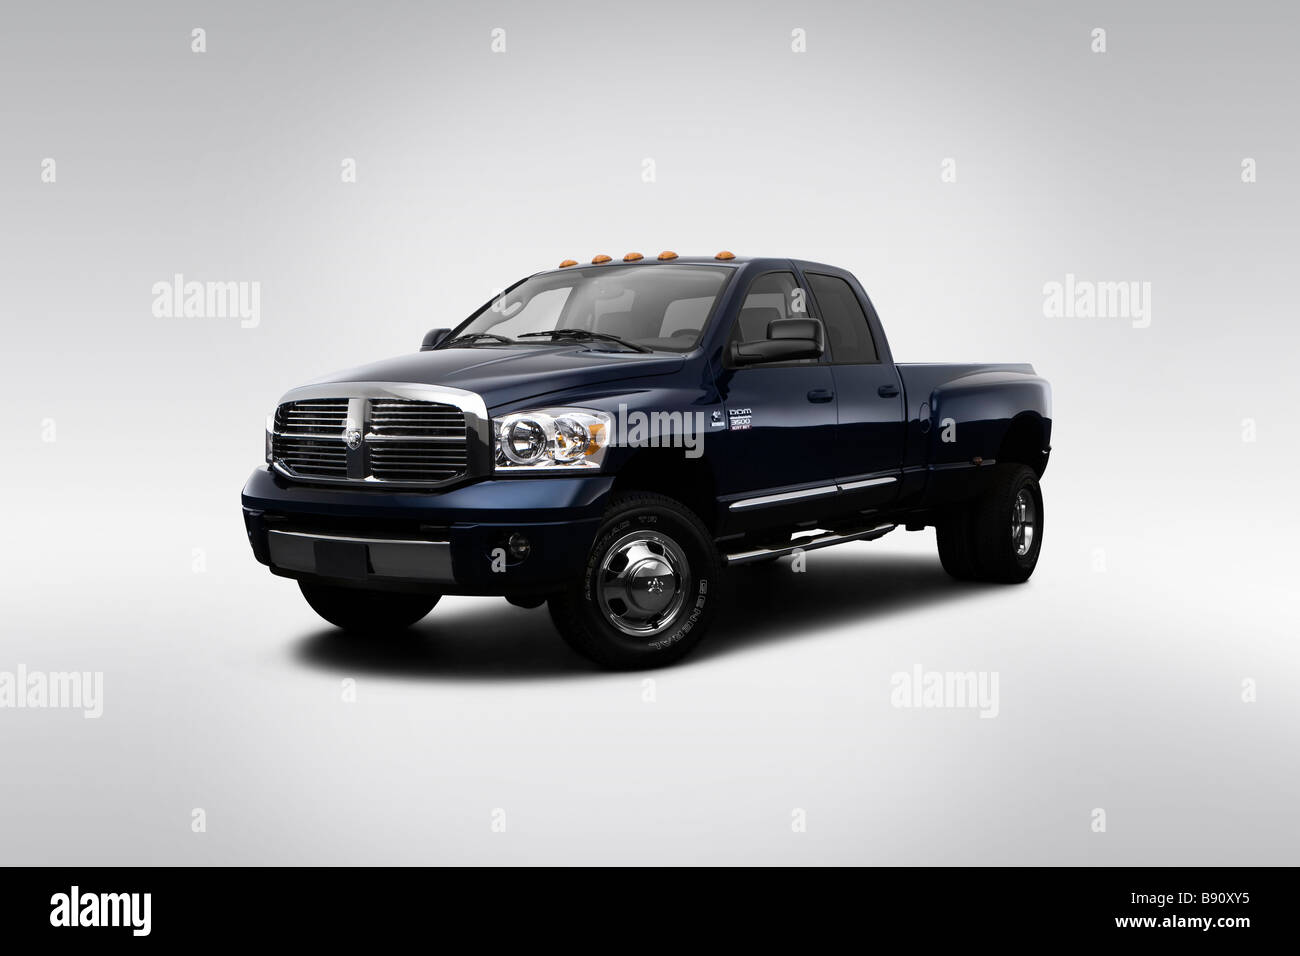 2009 Dodge Ram 3500 Laramie in Blue - Front angle view Stock Photo